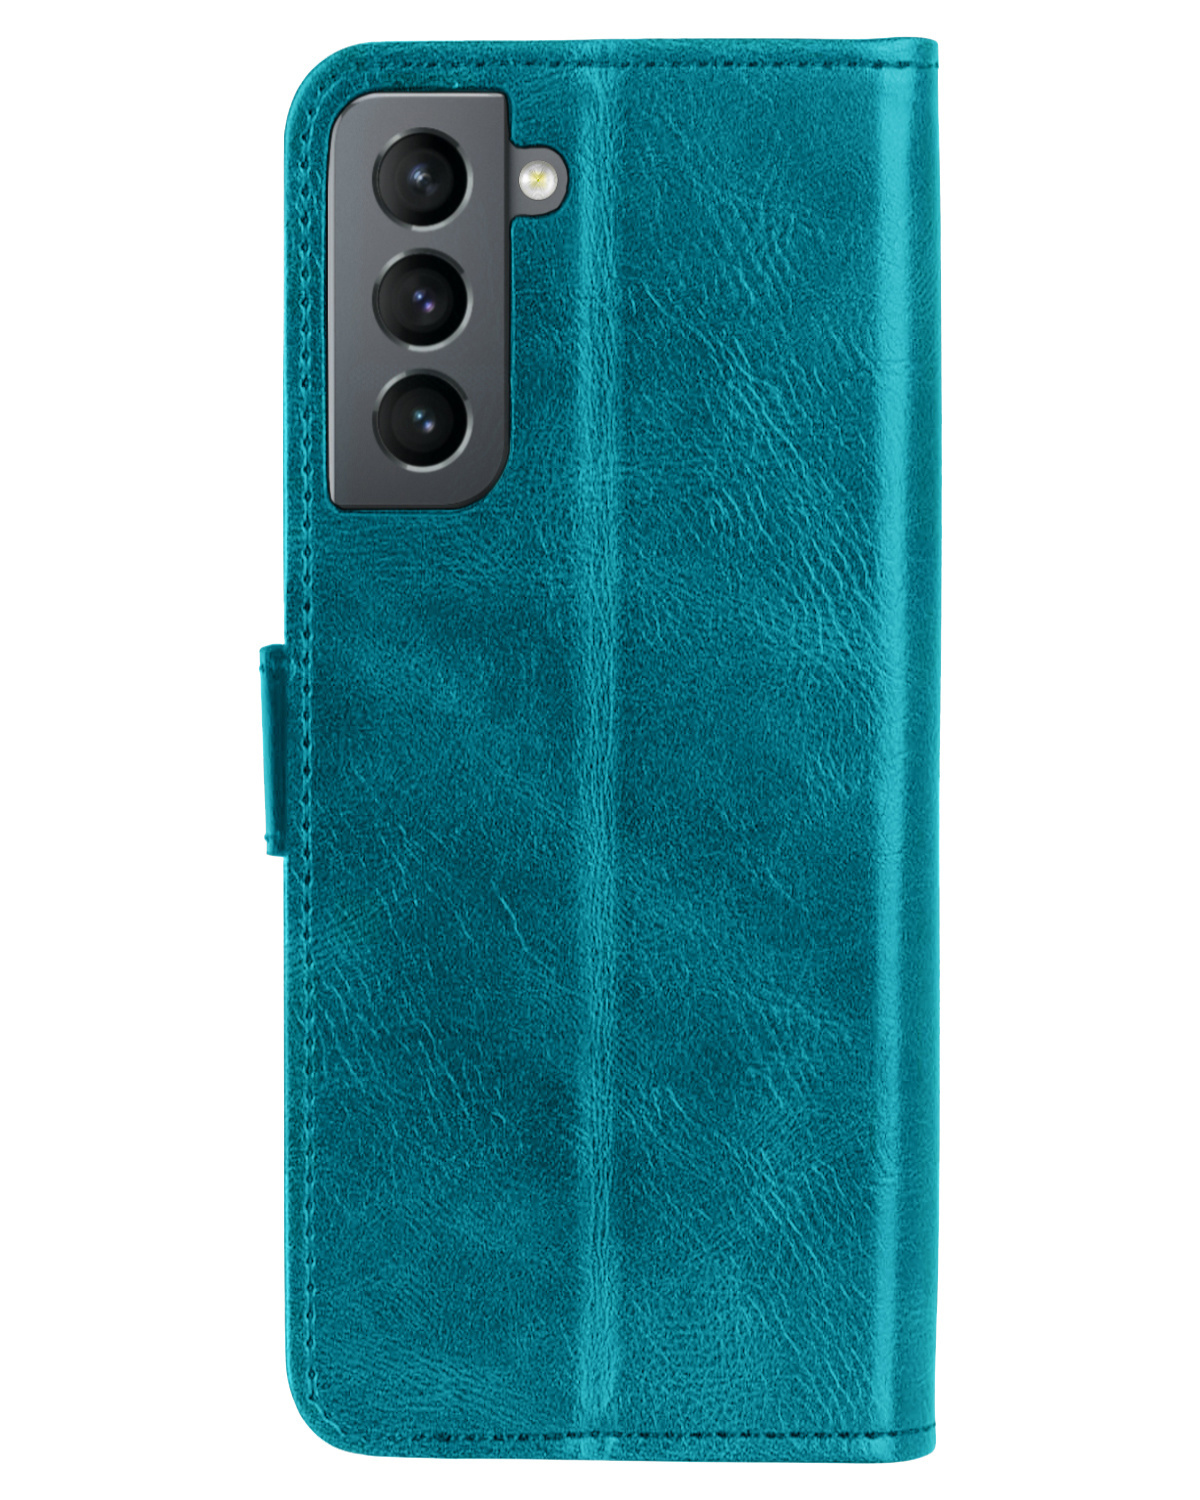 Nomfy Samsung Galaxy S21 FE Hoesje Bookcase Met 2x Screenprotector - Samsung S21 FE 2x Screenprotector - Samsung Galaxy S21 FE Book Case Met 2x Screenprotector Turquoise